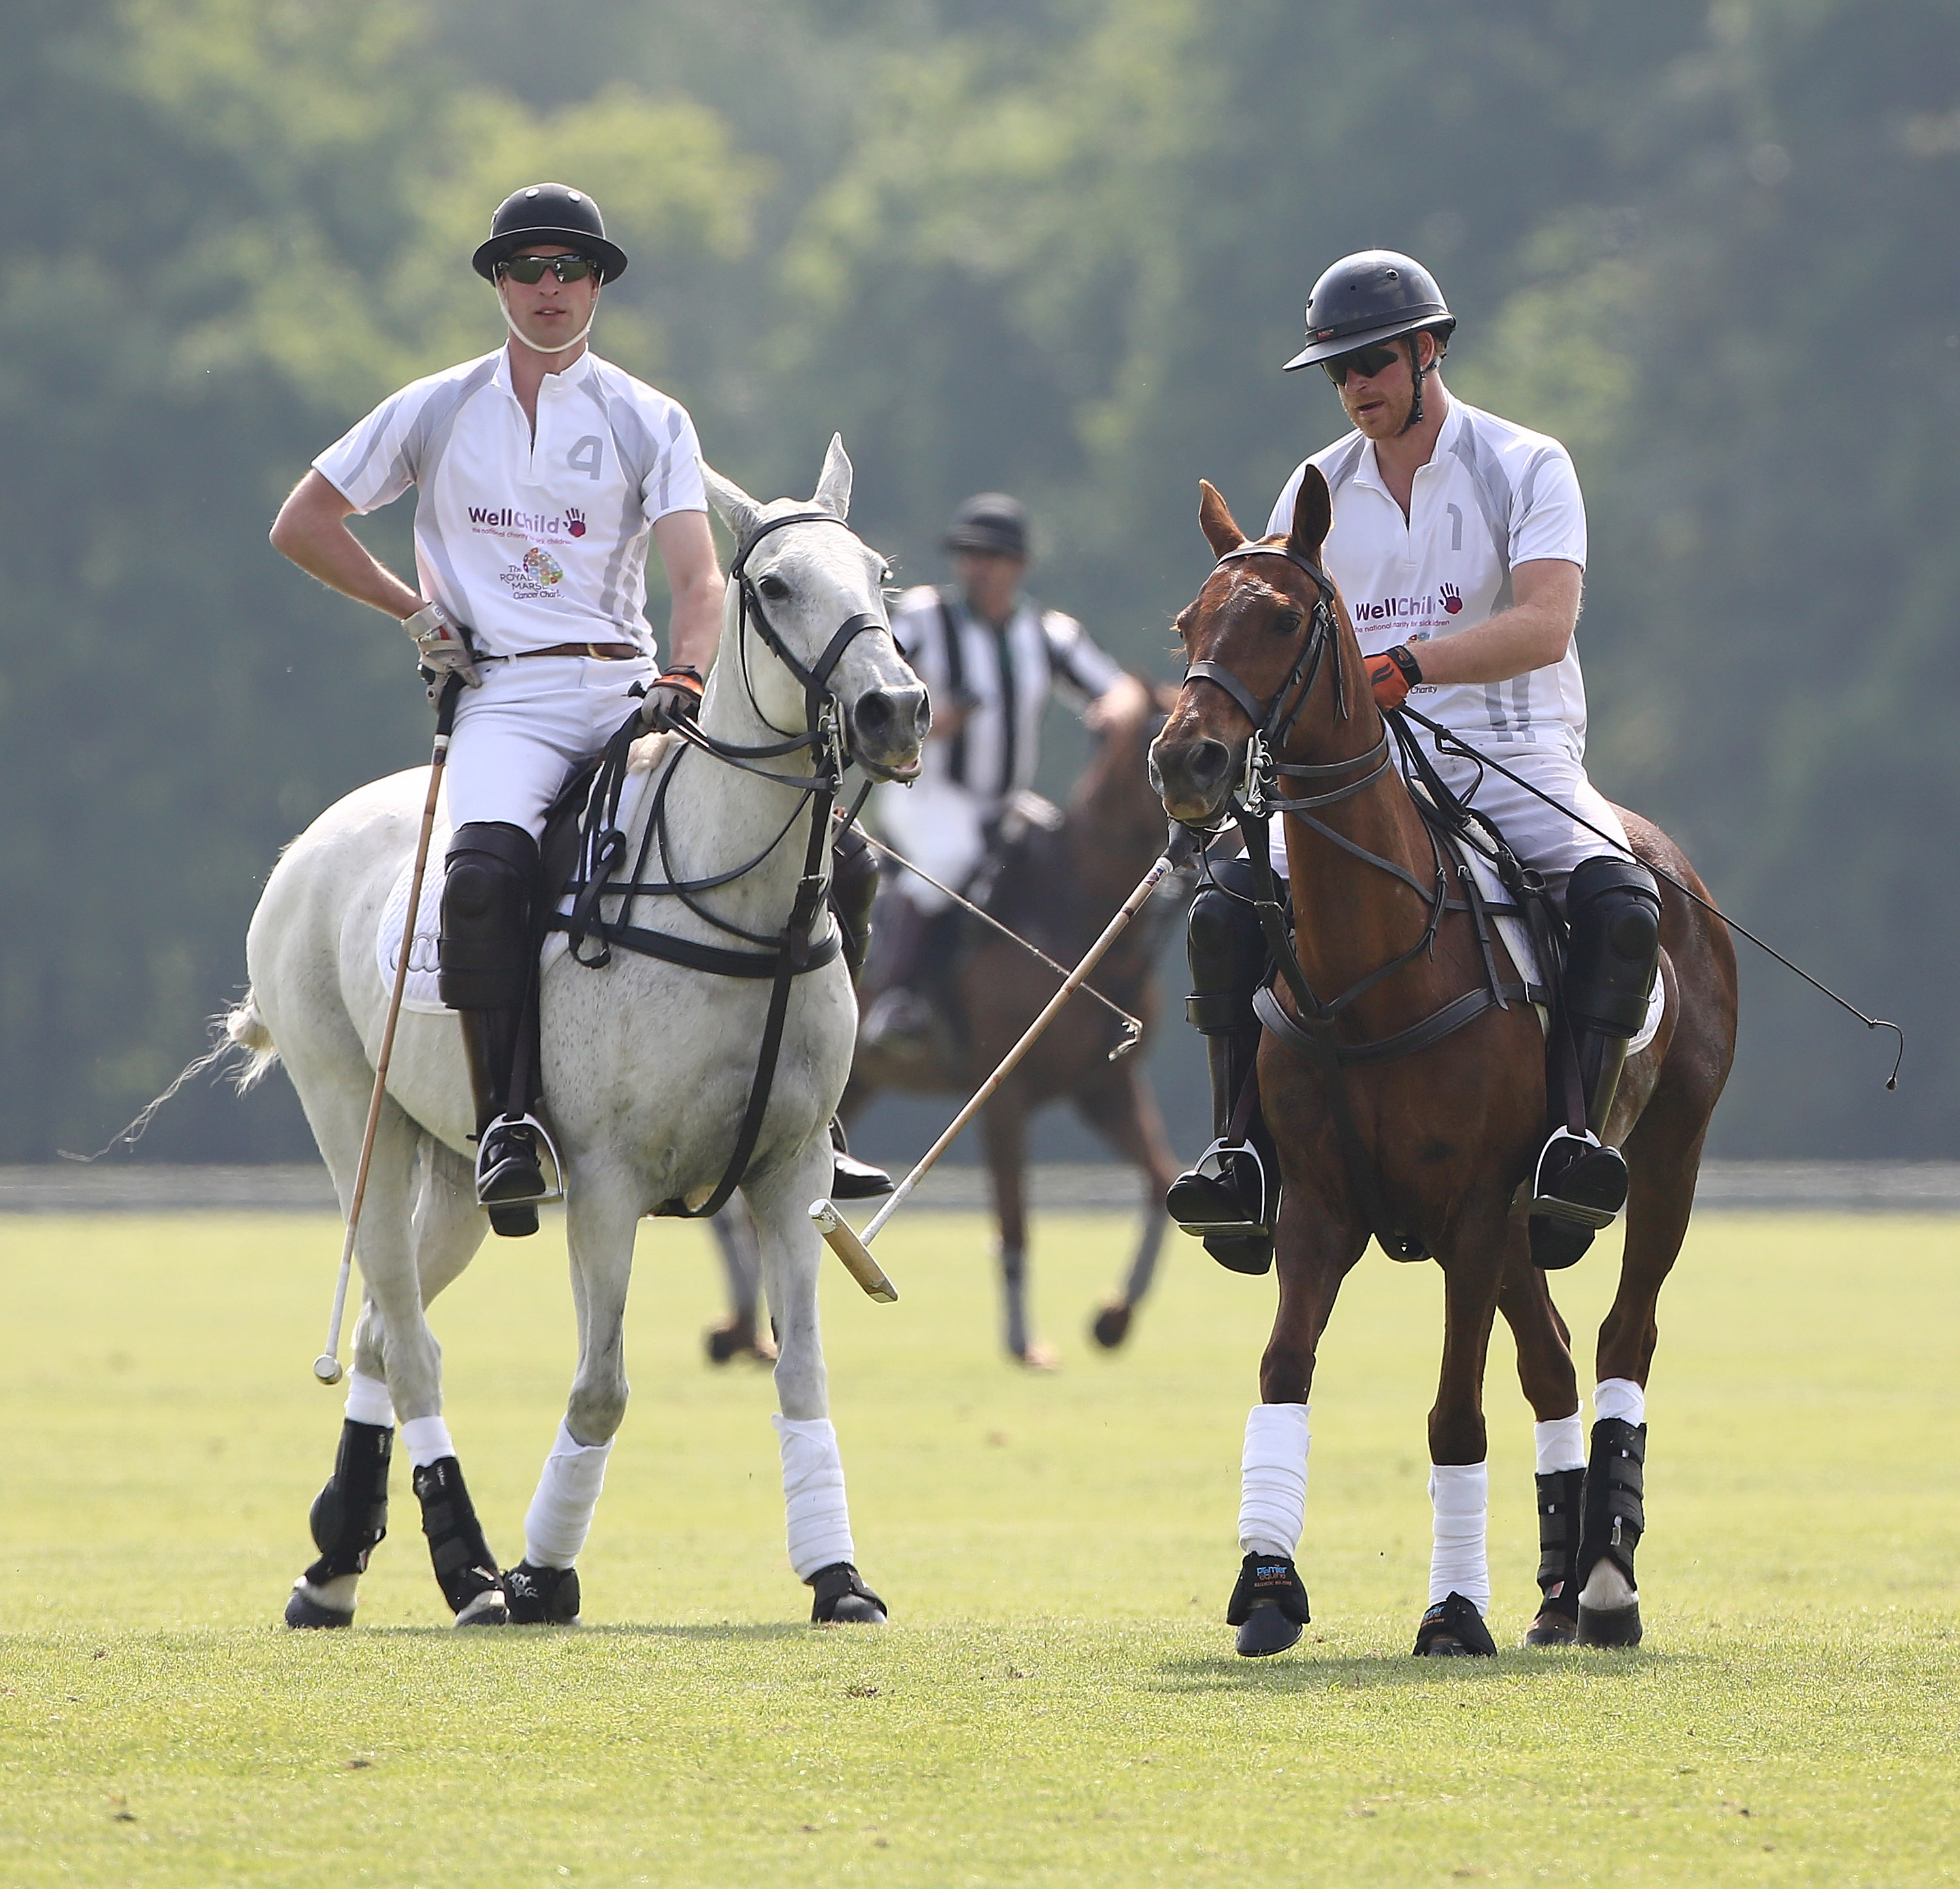 Prince William the Duke of Cambridge and Prince Harry attend day two of the Audi Polo Challenge at Coworth Park on May 29, 2016 in London, England. (David M. Benett—Dave Benett/Getty Images for Aud)